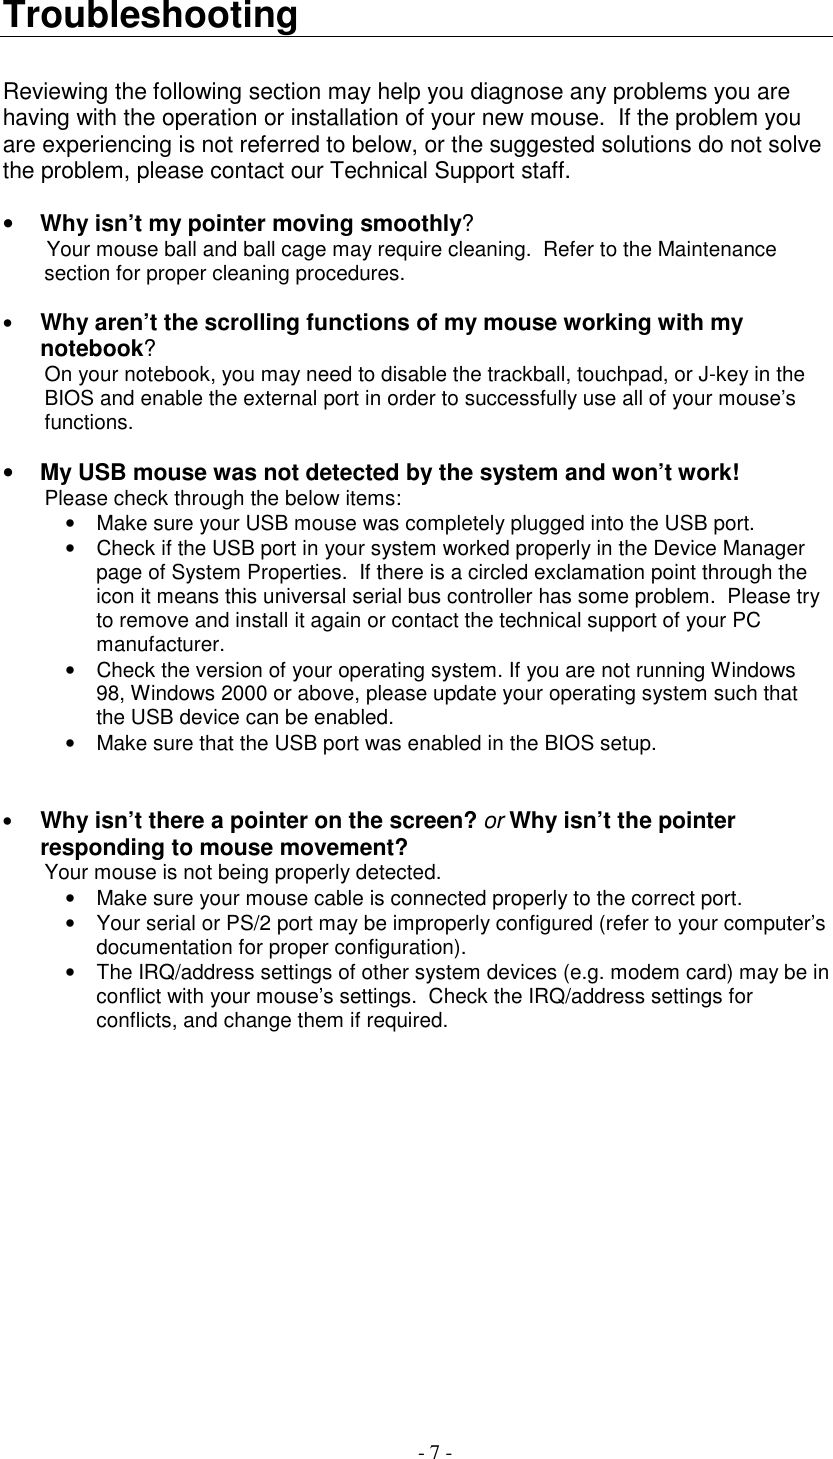 - 7 -TroubleshootingReviewing the following section may help you diagnose any problems you arehaving with the operation or installation of your new mouse.  If the problem youare experiencing is not referred to below, or the suggested solutions do not solvethe problem, please contact our Technical Support staff.• Why isn’t my pointer moving smoothly?Your mouse ball and ball cage may require cleaning.  Refer to the Maintenancesection for proper cleaning procedures.• Why aren’t the scrolling functions of my mouse working with mynotebook?On your notebook, you may need to disable the trackball, touchpad, or J-key in theBIOS and enable the external port in order to successfully use all of your mouse’sfunctions.• My USB mouse was not detected by the system and won’t work!Please check through the below items:•  Make sure your USB mouse was completely plugged into the USB port.•  Check if the USB port in your system worked properly in the Device Managerpage of System Properties.  If there is a circled exclamation point through theicon it means this universal serial bus controller has some problem.  Please tryto remove and install it again or contact the technical support of your PCmanufacturer.•  Check the version of your operating system. If you are not running Windows98, Windows 2000 or above, please update your operating system such thatthe USB device can be enabled.•  Make sure that the USB port was enabled in the BIOS setup.• Why isn’t there a pointer on the screen? or Why isn’t the pointerresponding to mouse movement?Your mouse is not being properly detected.•  Make sure your mouse cable is connected properly to the correct port.•  Your serial or PS/2 port may be improperly configured (refer to your computer’sdocumentation for proper configuration).•  The IRQ/address settings of other system devices (e.g. modem card) may be inconflict with your mouse’s settings.  Check the IRQ/address settings forconflicts, and change them if required.